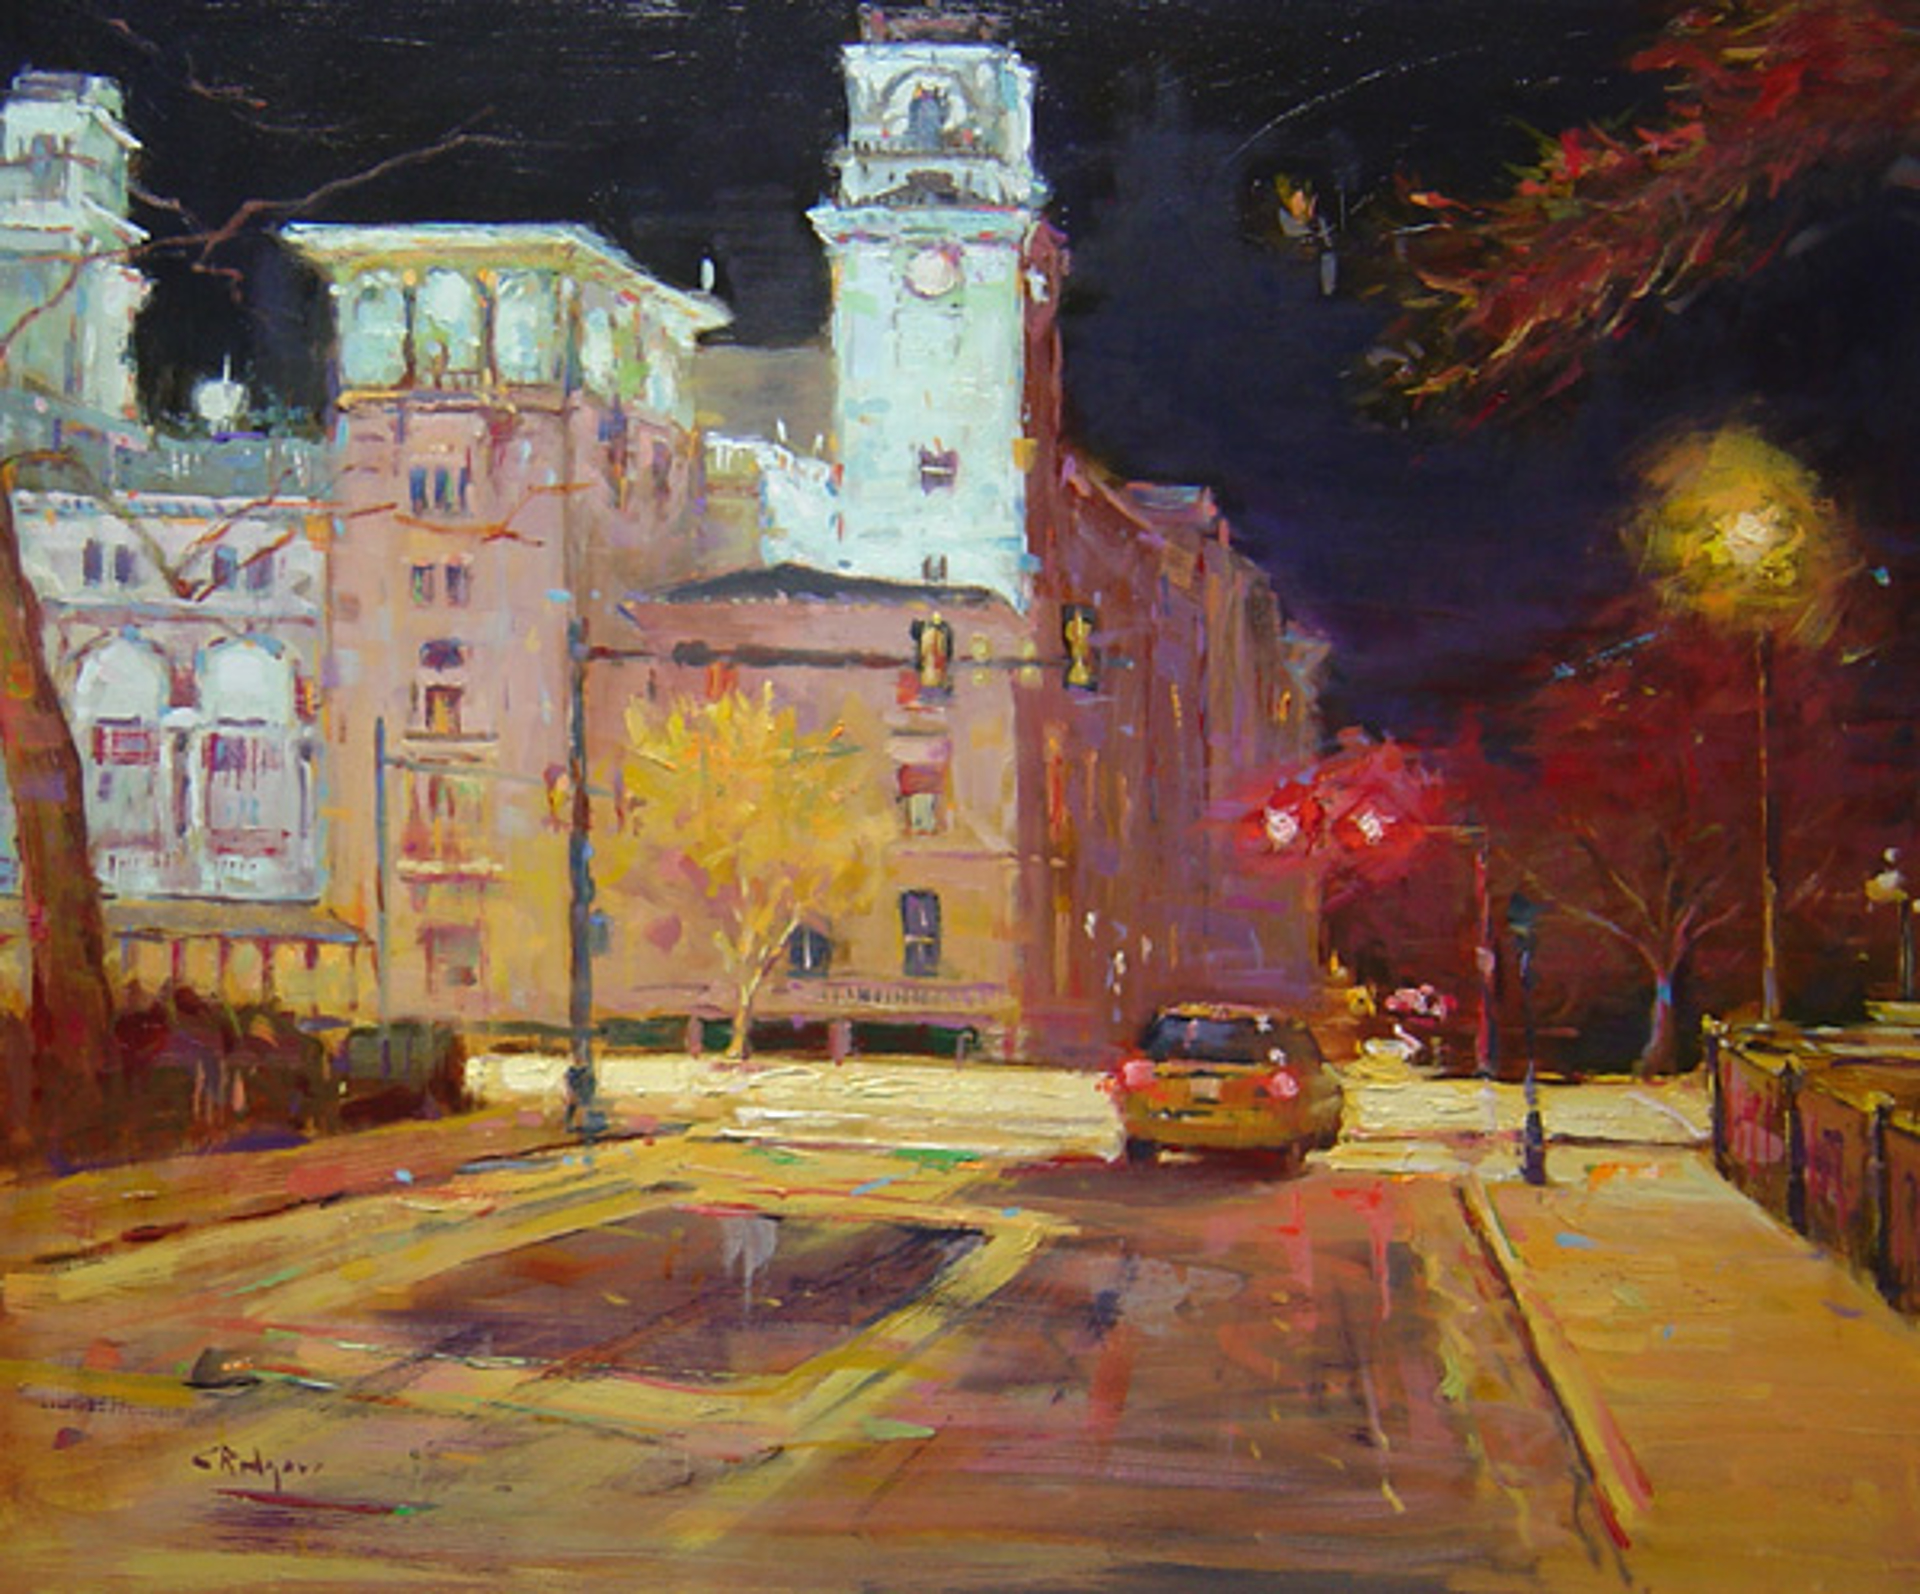 The Jefferson Hotel, 5 A.M. by Jim Rodgers